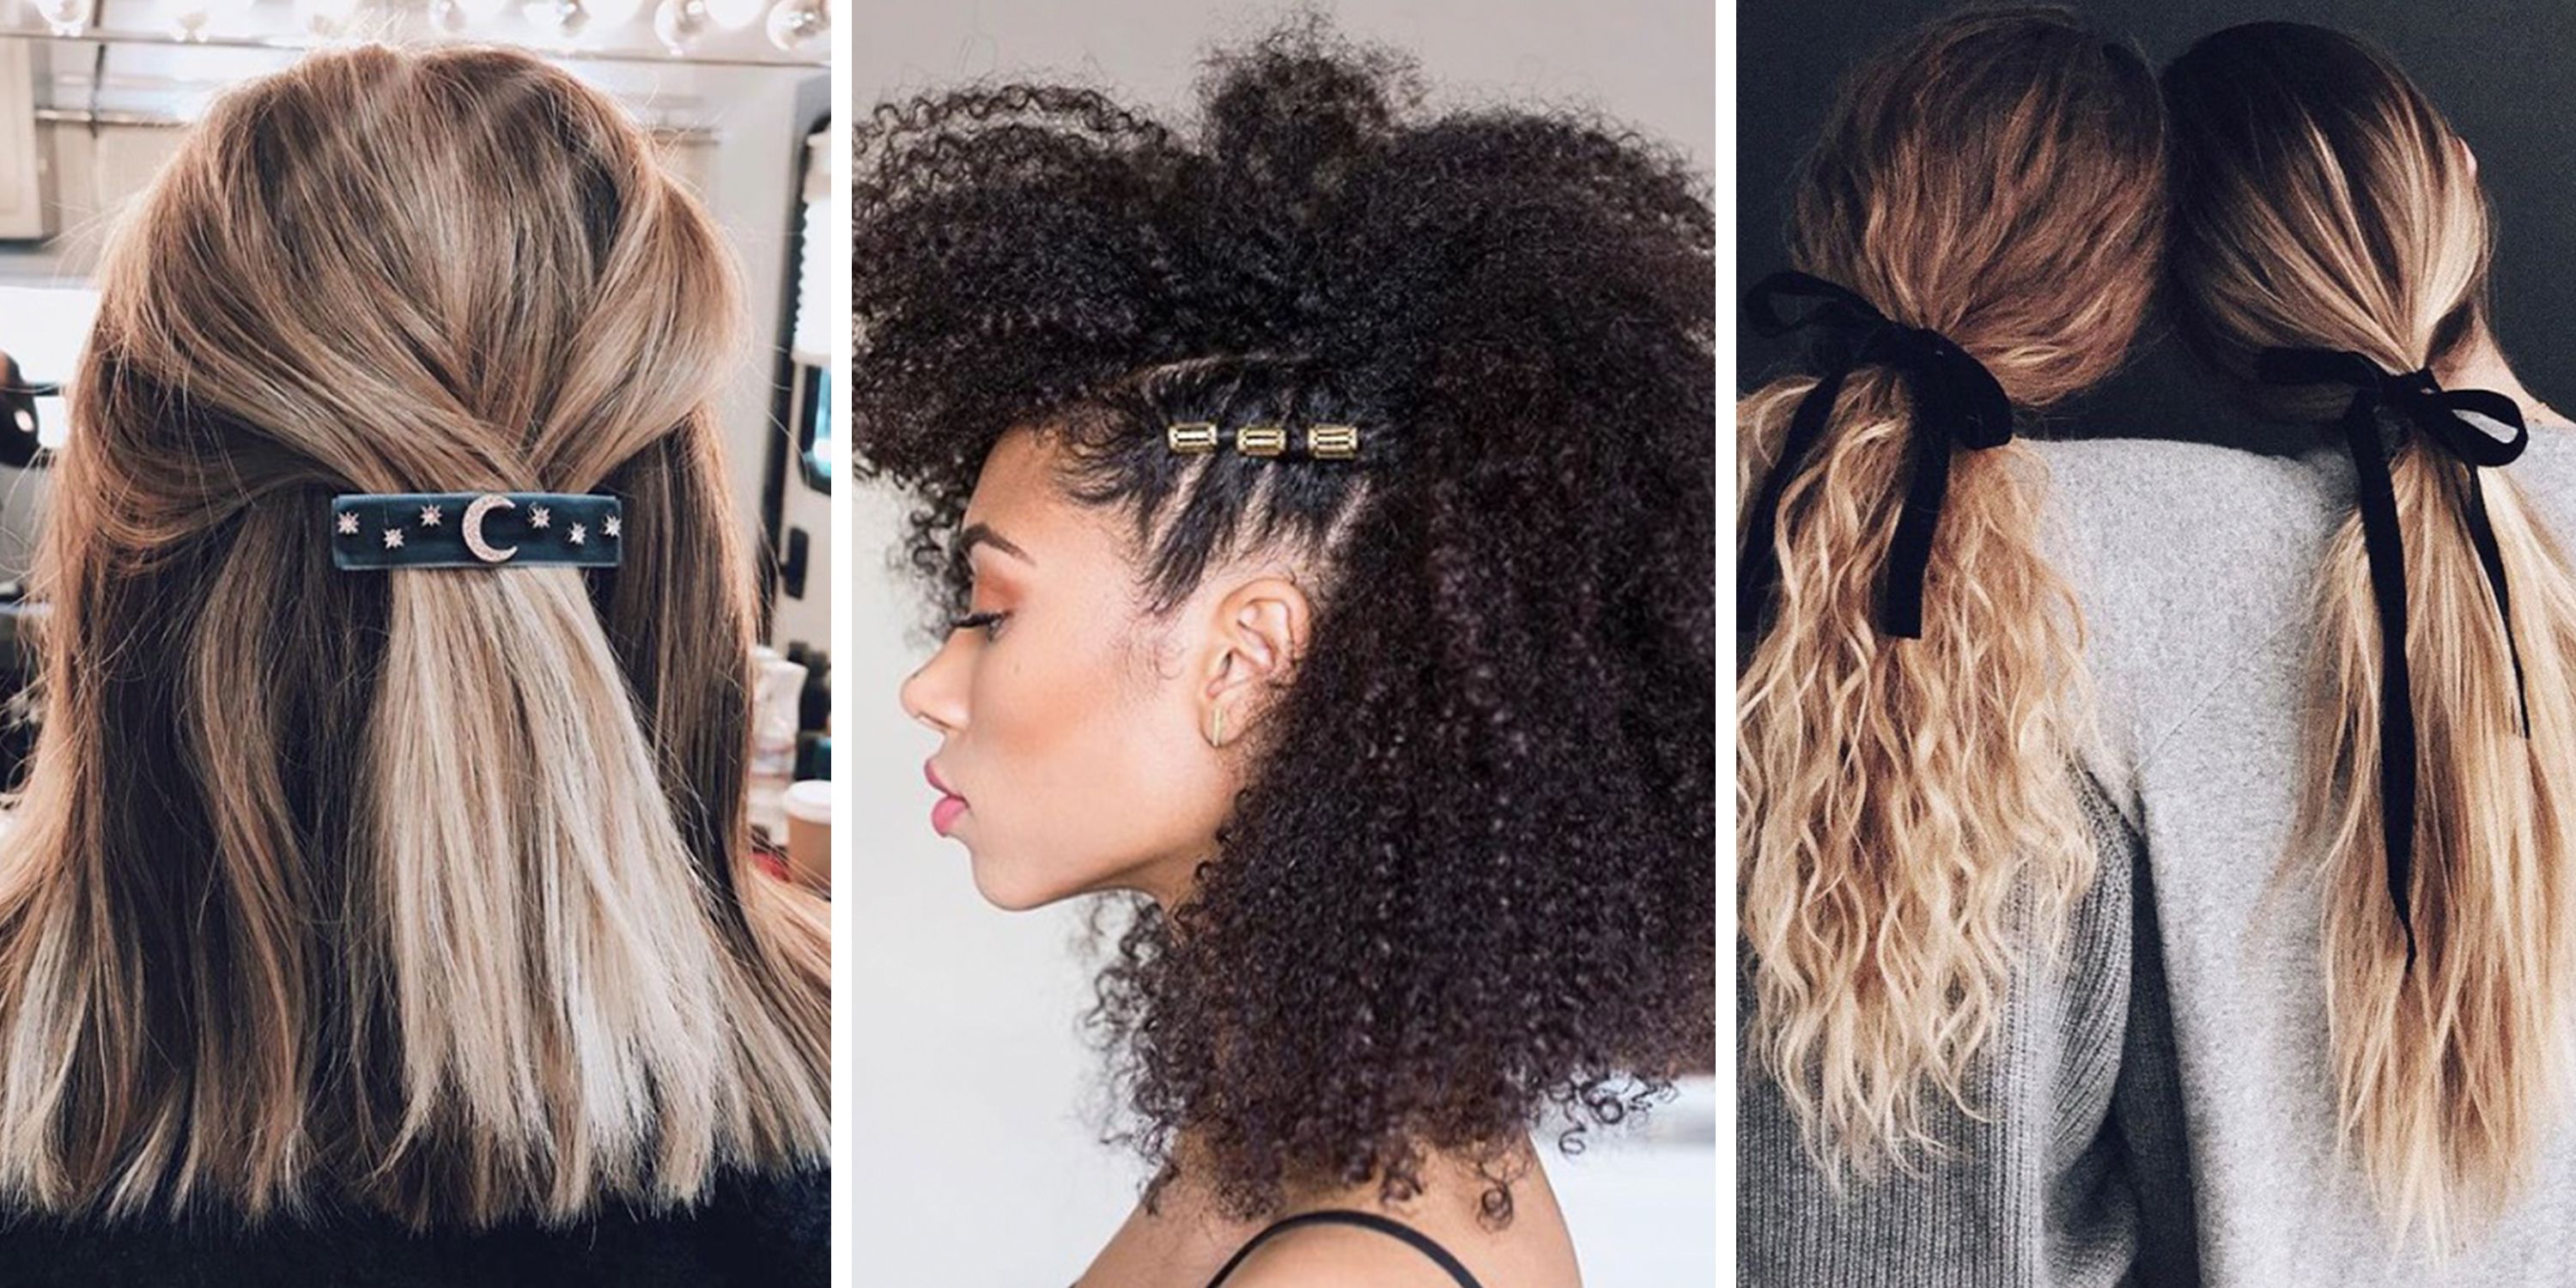 Hairstyles Trends in 2018